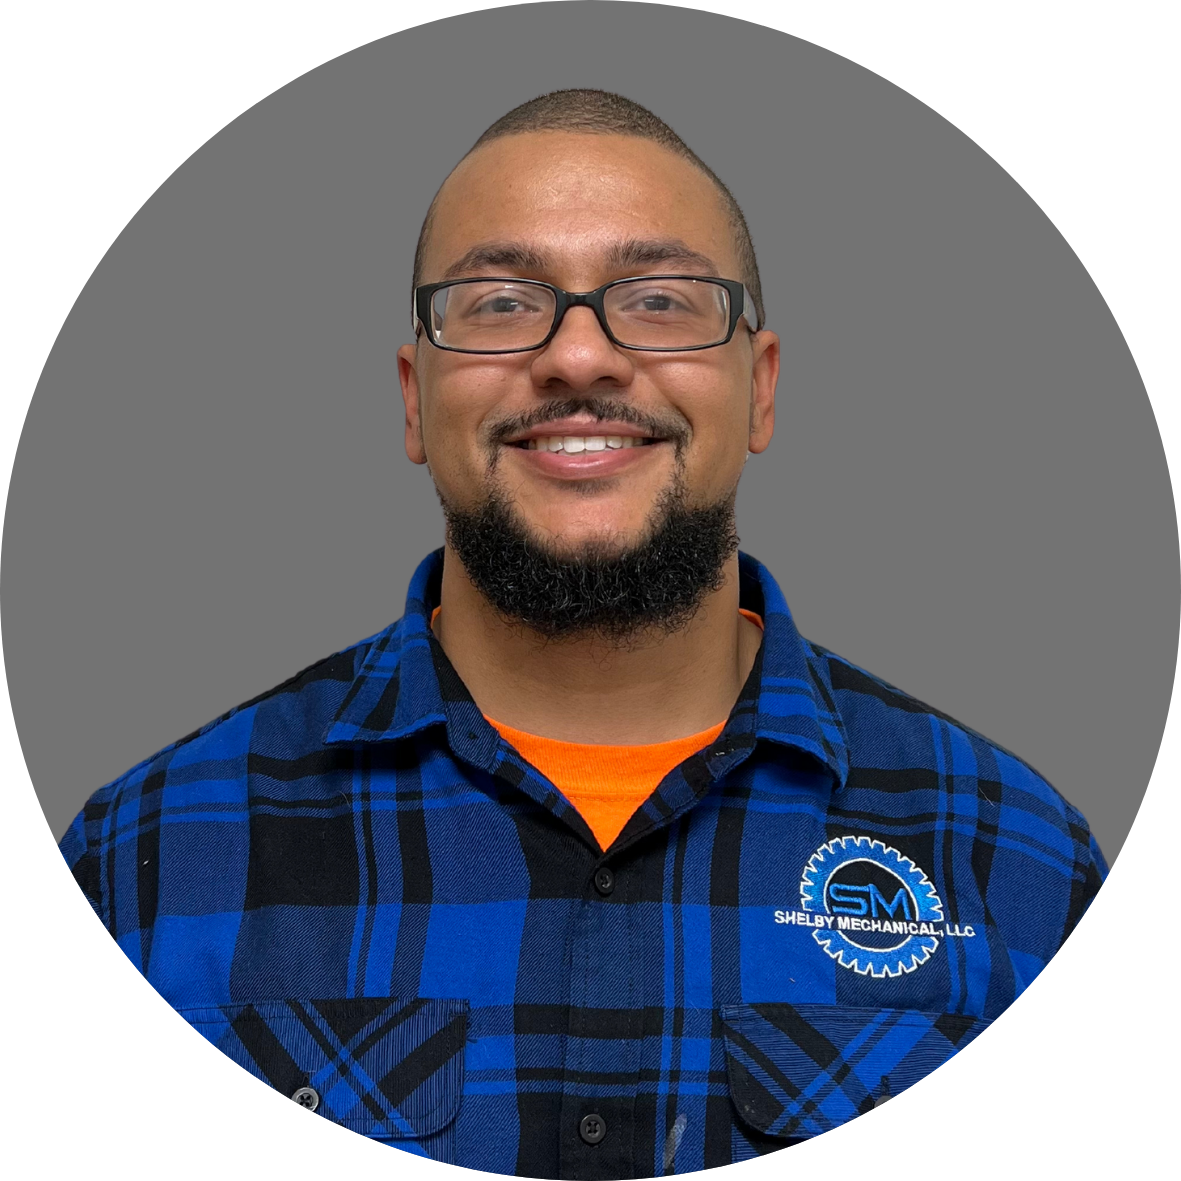 Marcus Prazuch from Shelby Mechanical, LLC in Sterling Heights, MI.